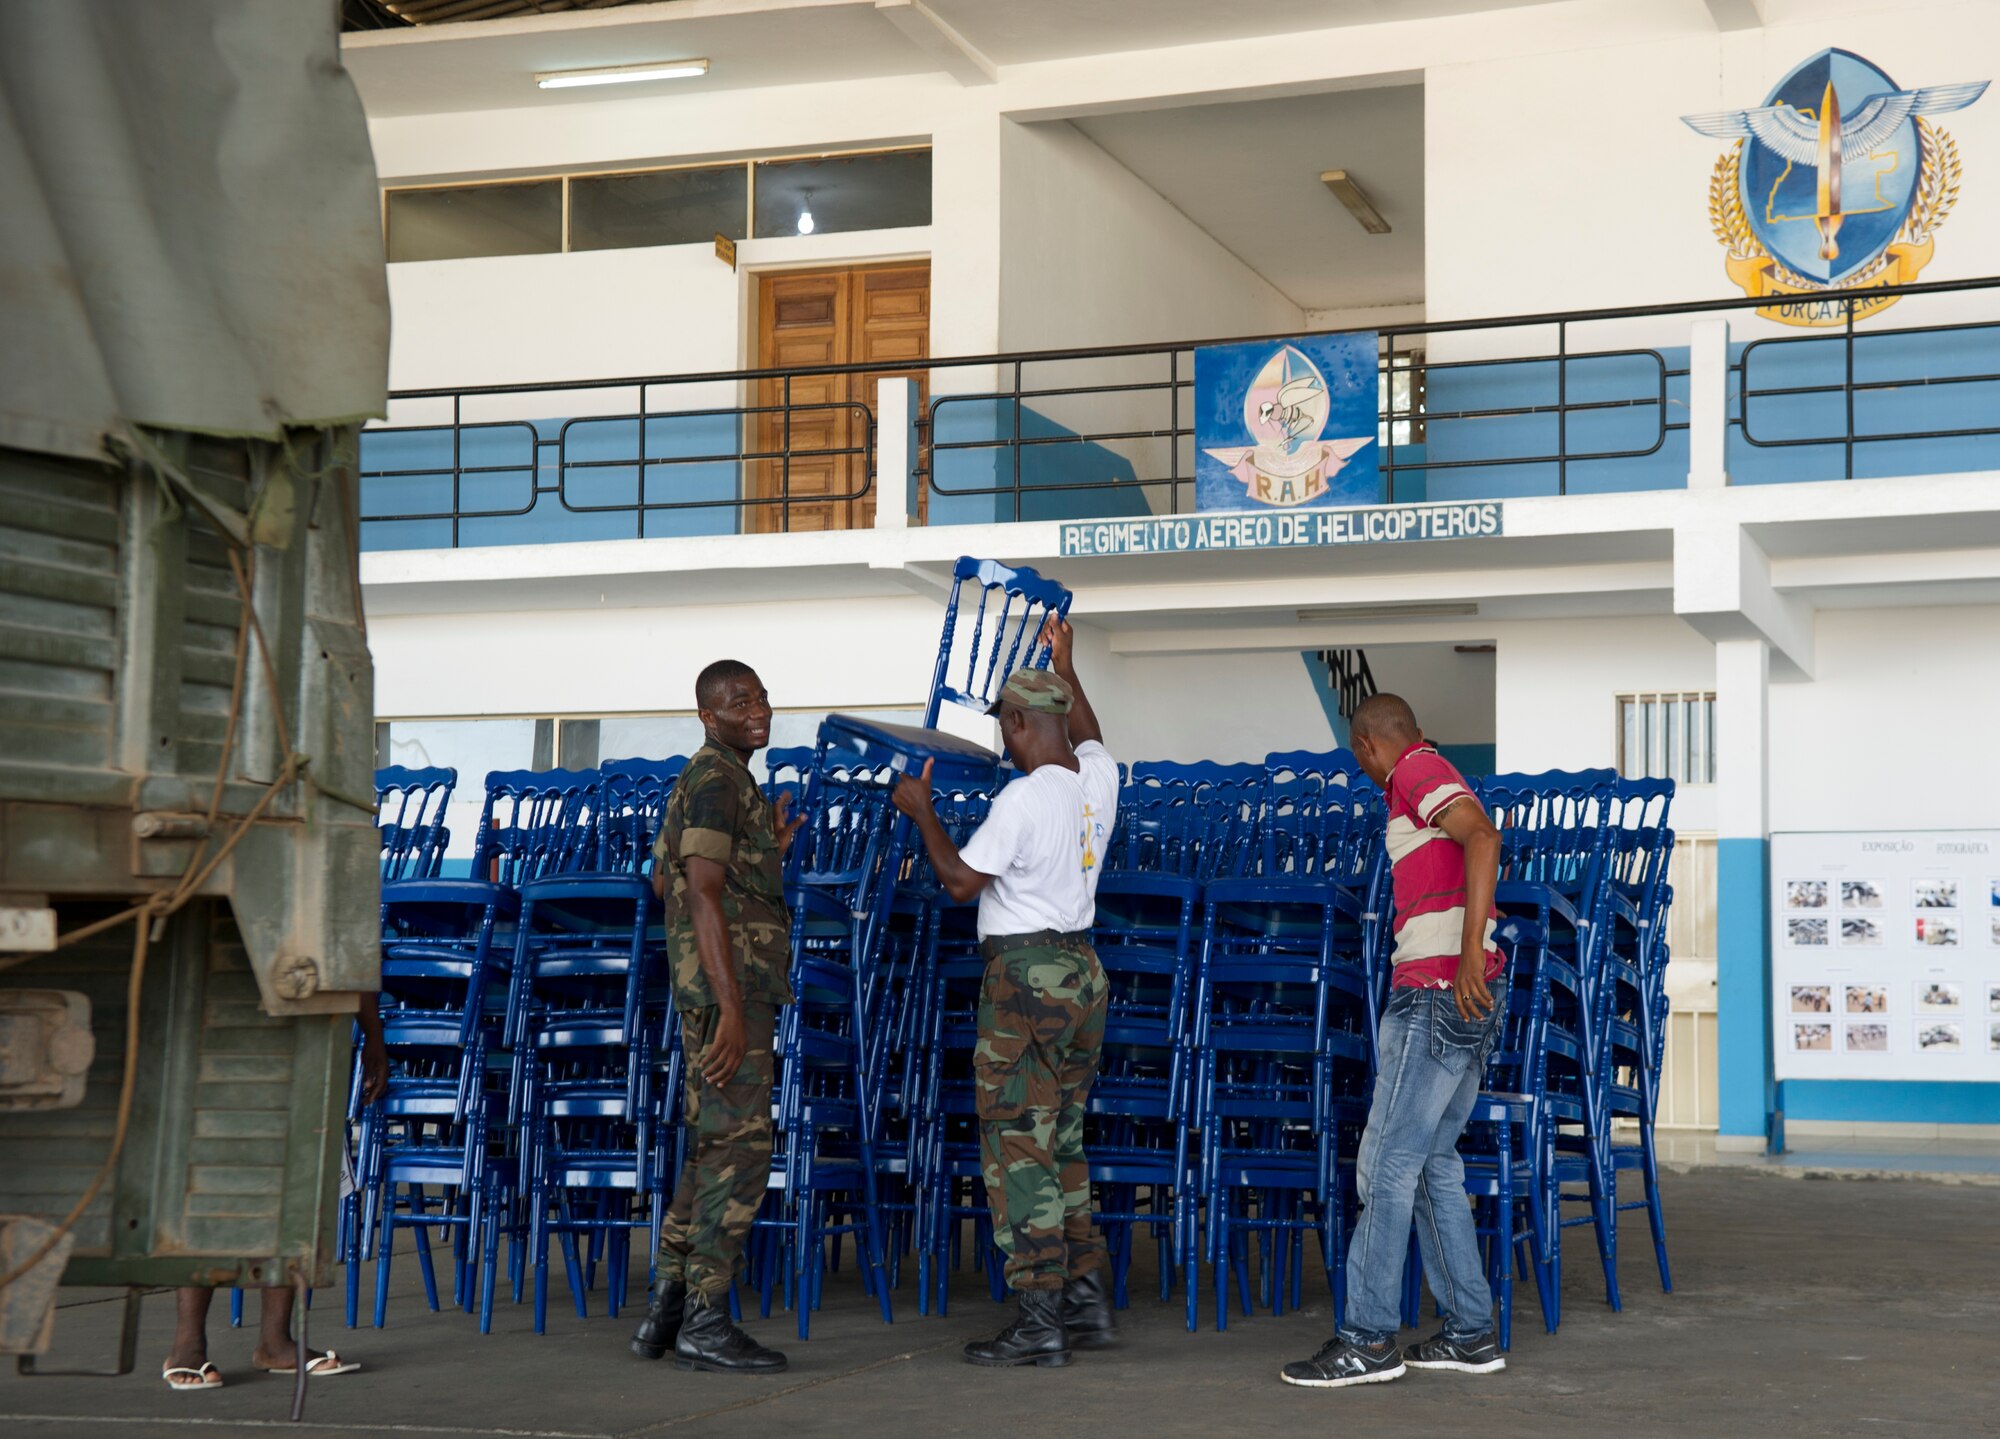 Angolan air force airmen unload chairs from a truck in preparation for African Partnership Flight at Luanda Air Base, Angola, March 22, 2014. More than 20 U.S. Air Force airmen arrived to participate in African Partnership Flight with the Angolan and Zambian air forces, an event which provides a collaborative learning environment for the airmen. (U.S. Air Force photo/Tech. Sgt. Benjamin Wilson)